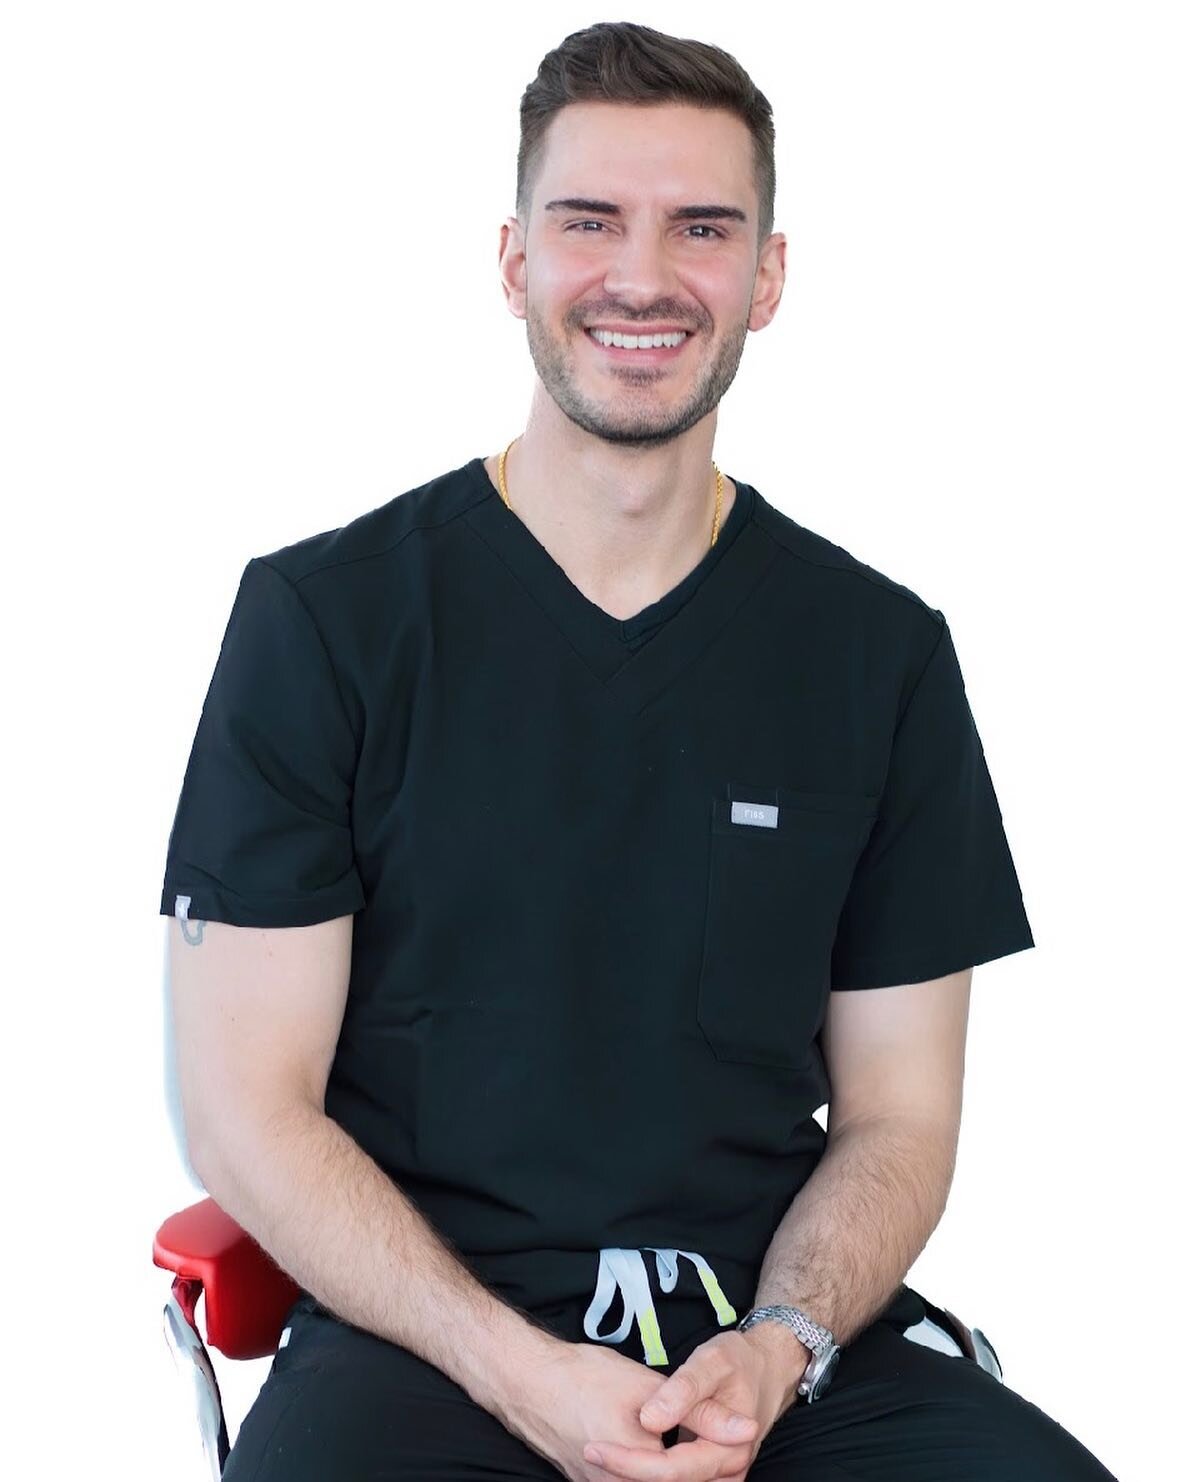 Meet our nurse, Nick. He&rsquo;s a certified aesthetic nurse and has been an RN for over 7 years with a background in emergency nursing, oncology, and neurology. From venipuncture to wound care, Nick is no stranger to the bedside and loves practicing